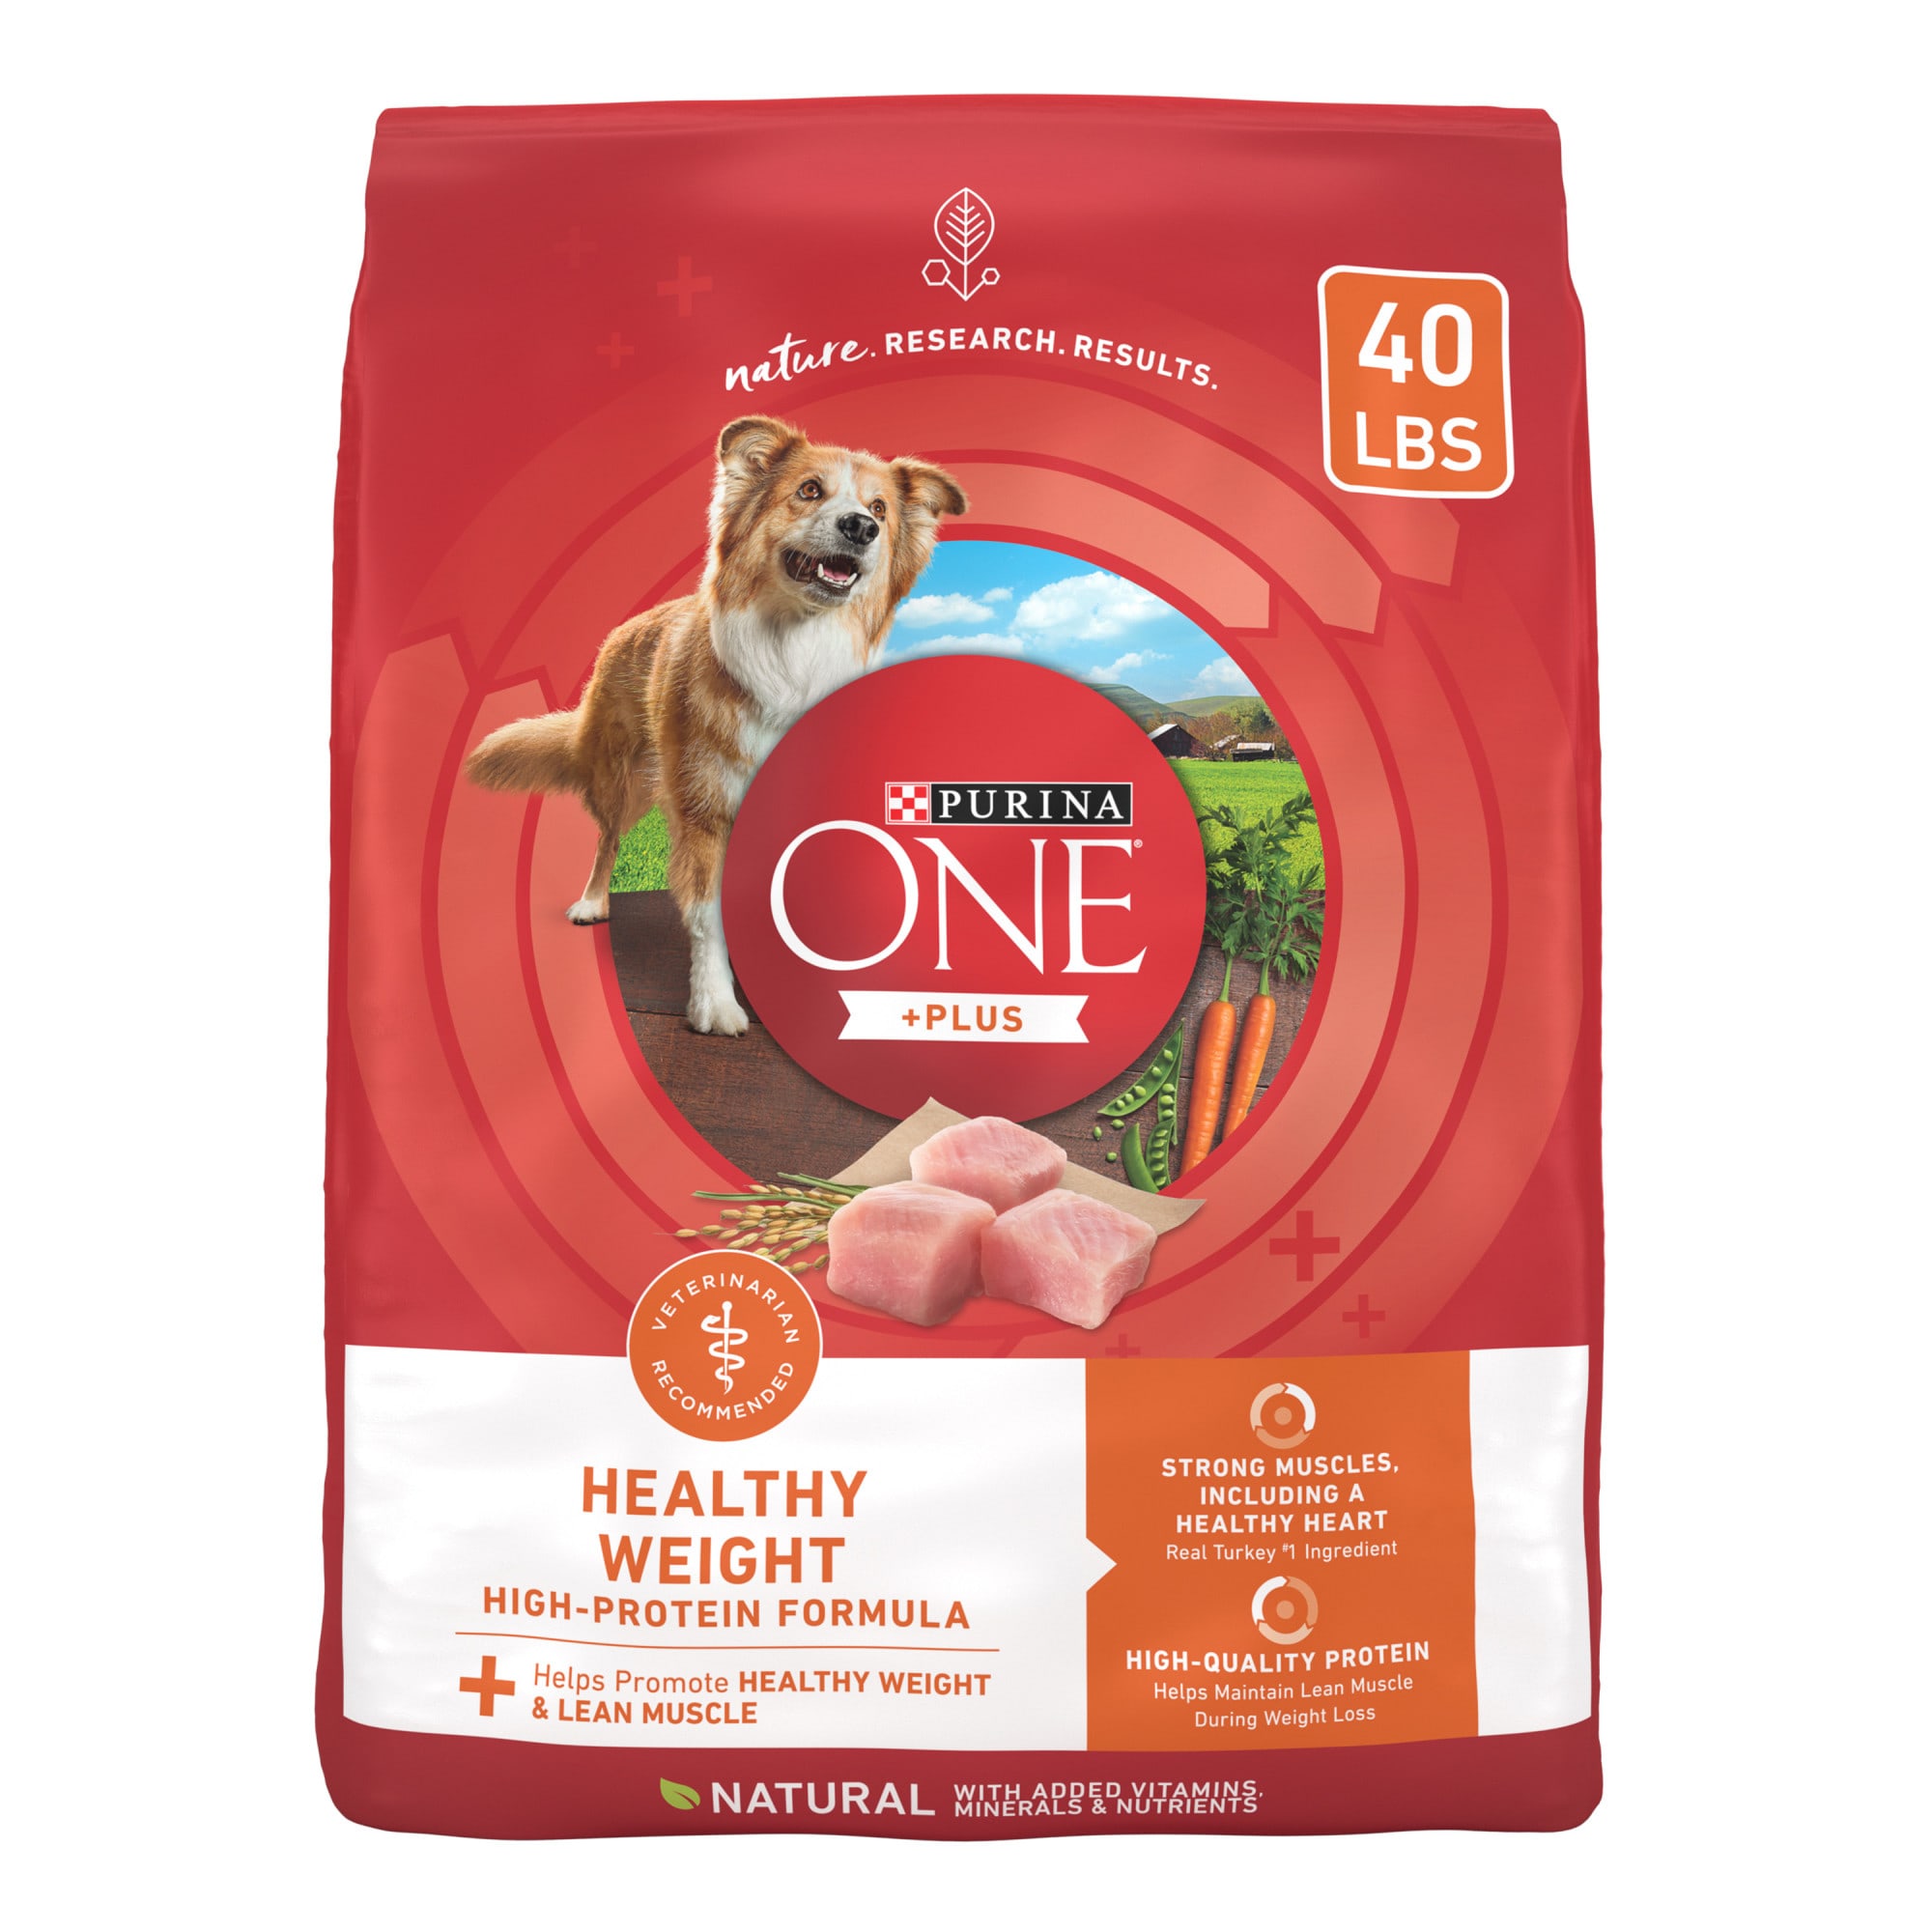 UPC 017800179331 product image for Purina ONE Plus Healthy Weight High Protein Formula Dry Dog Food, 40 lbs. | upcitemdb.com